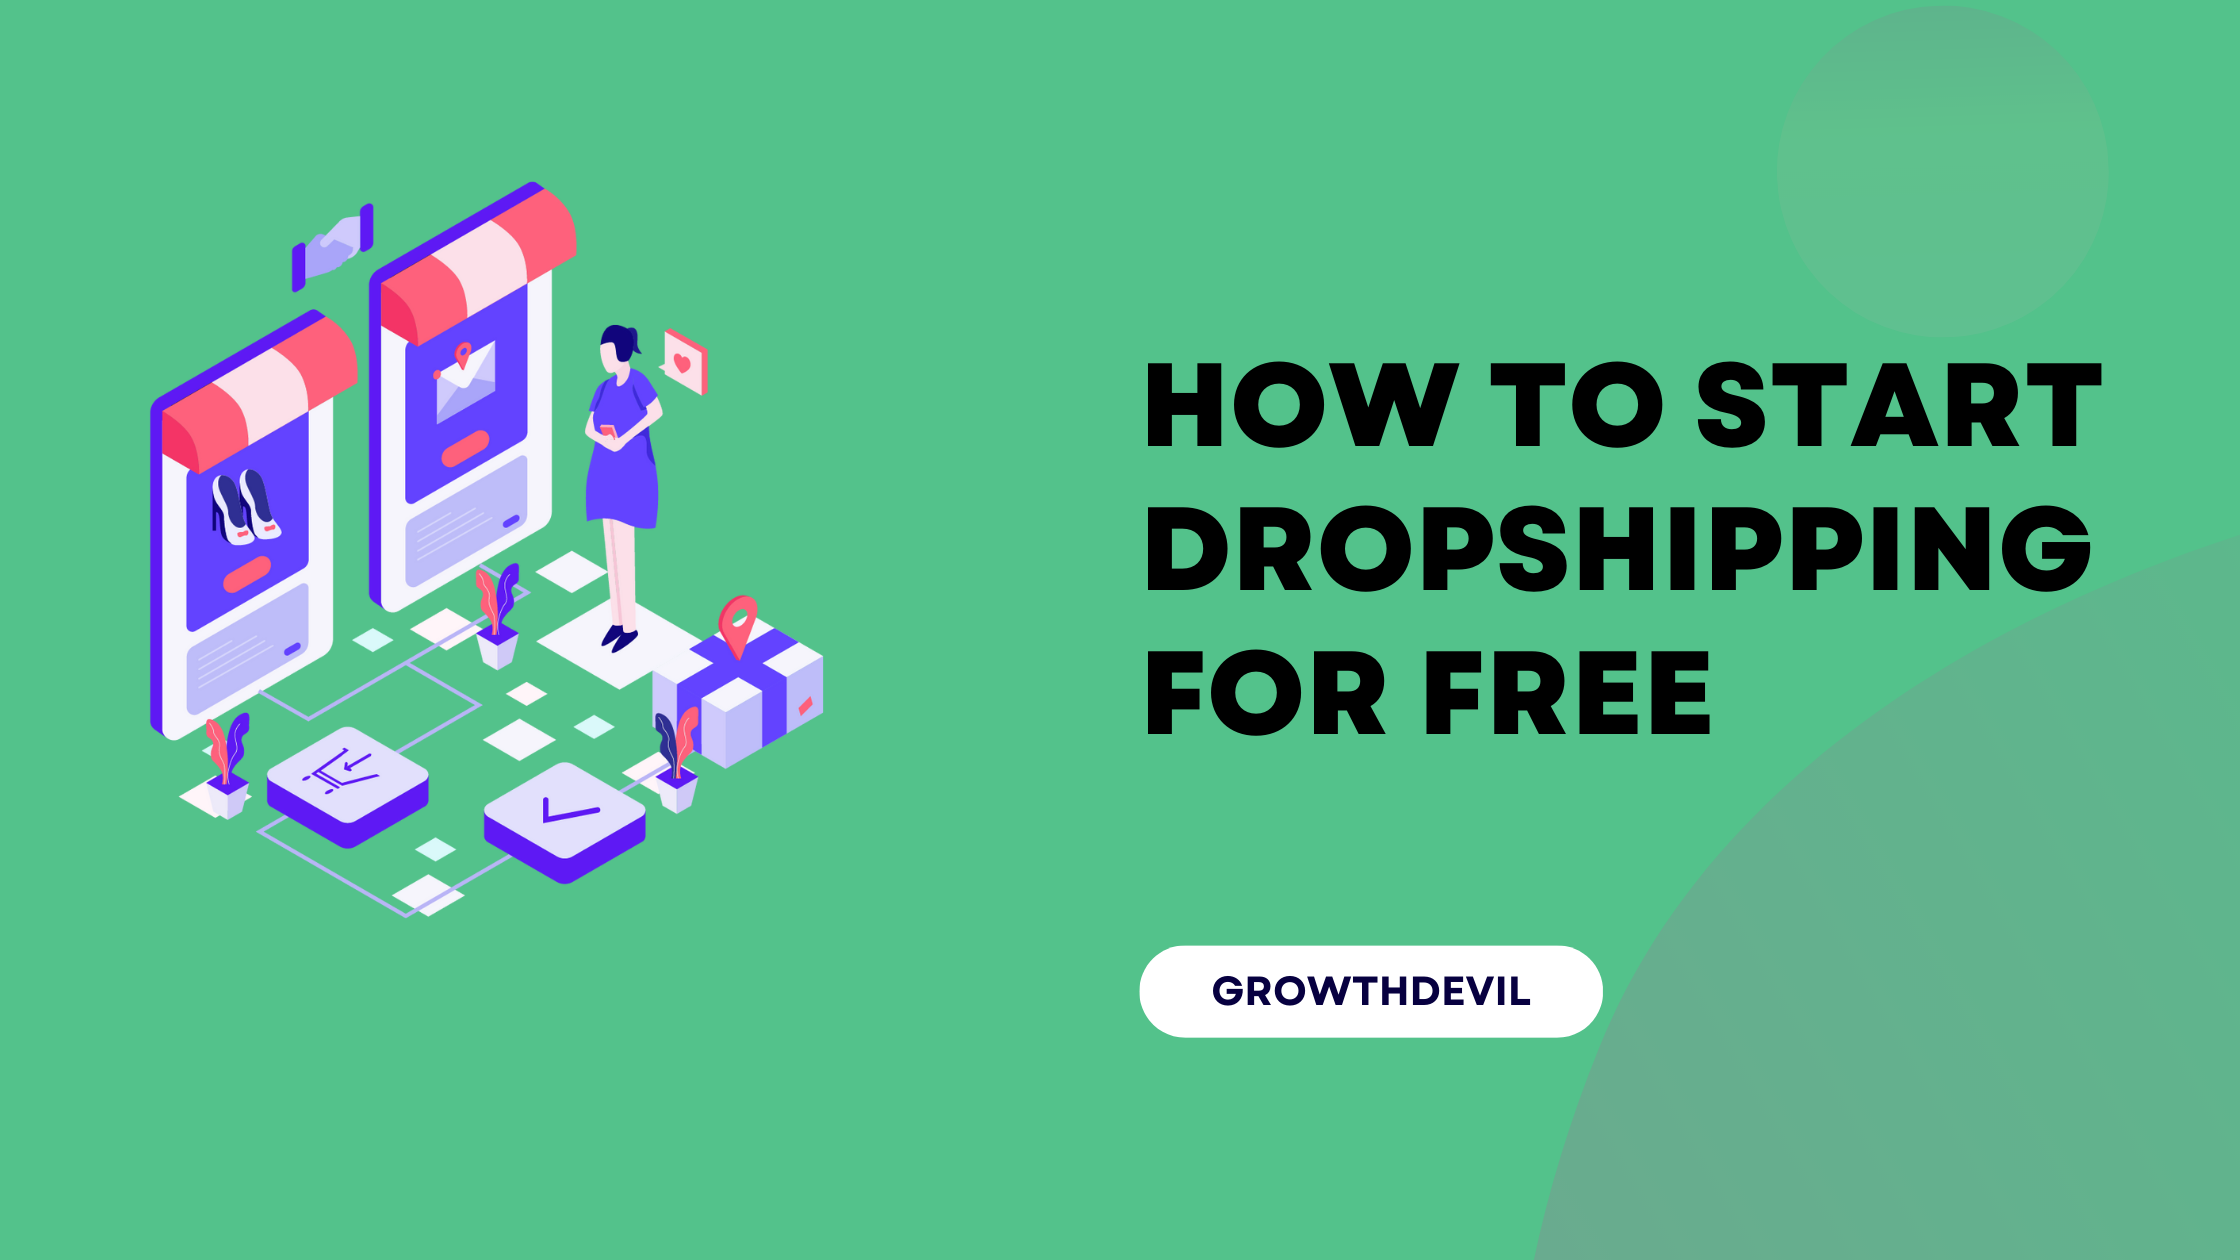 How To Start Dropshipping For Free - GrowthDevil